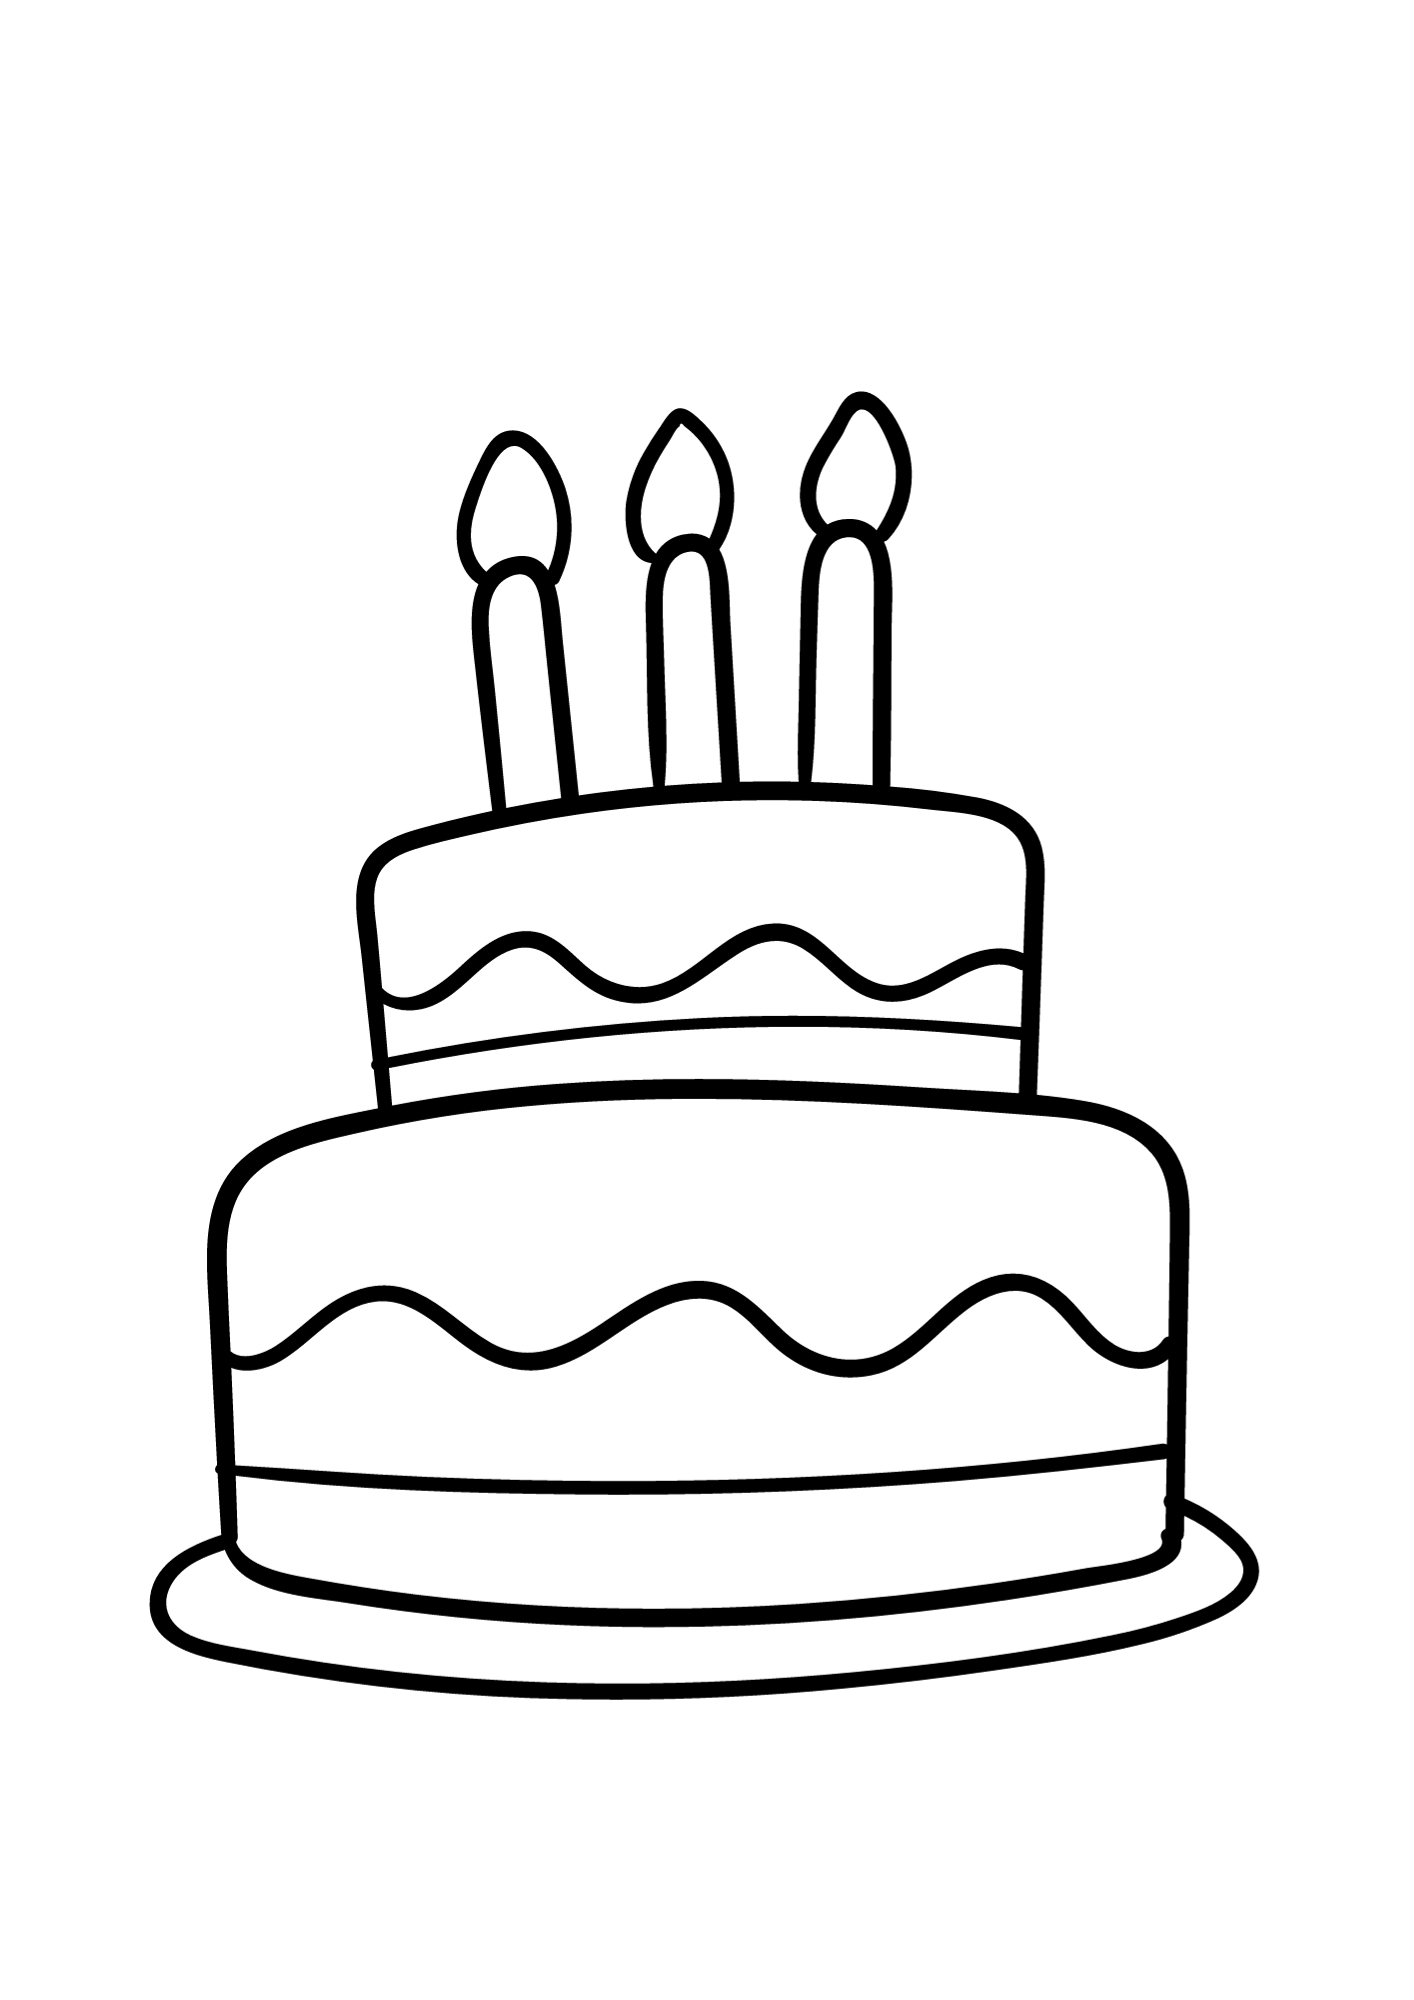 Simple Birthday cake coloring page